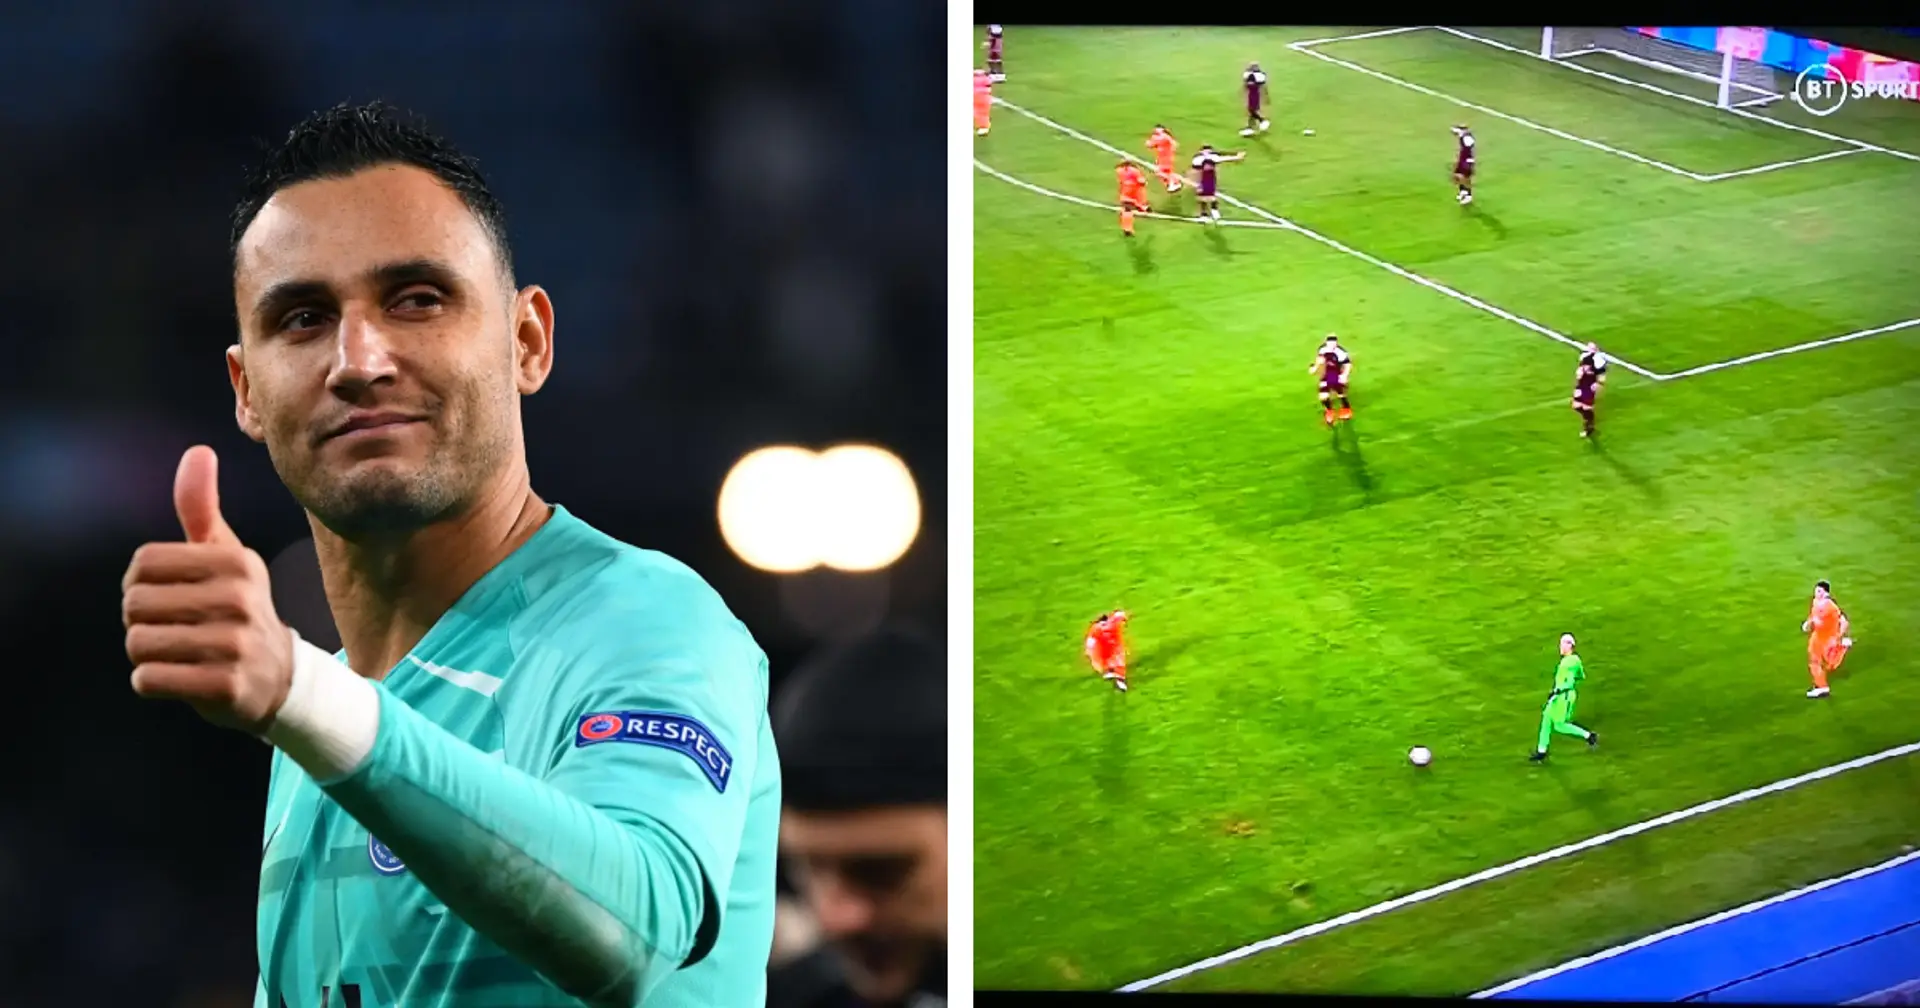 Hilarious: Keylor Navas plays outfield for a bit after being bored in PSG goal 